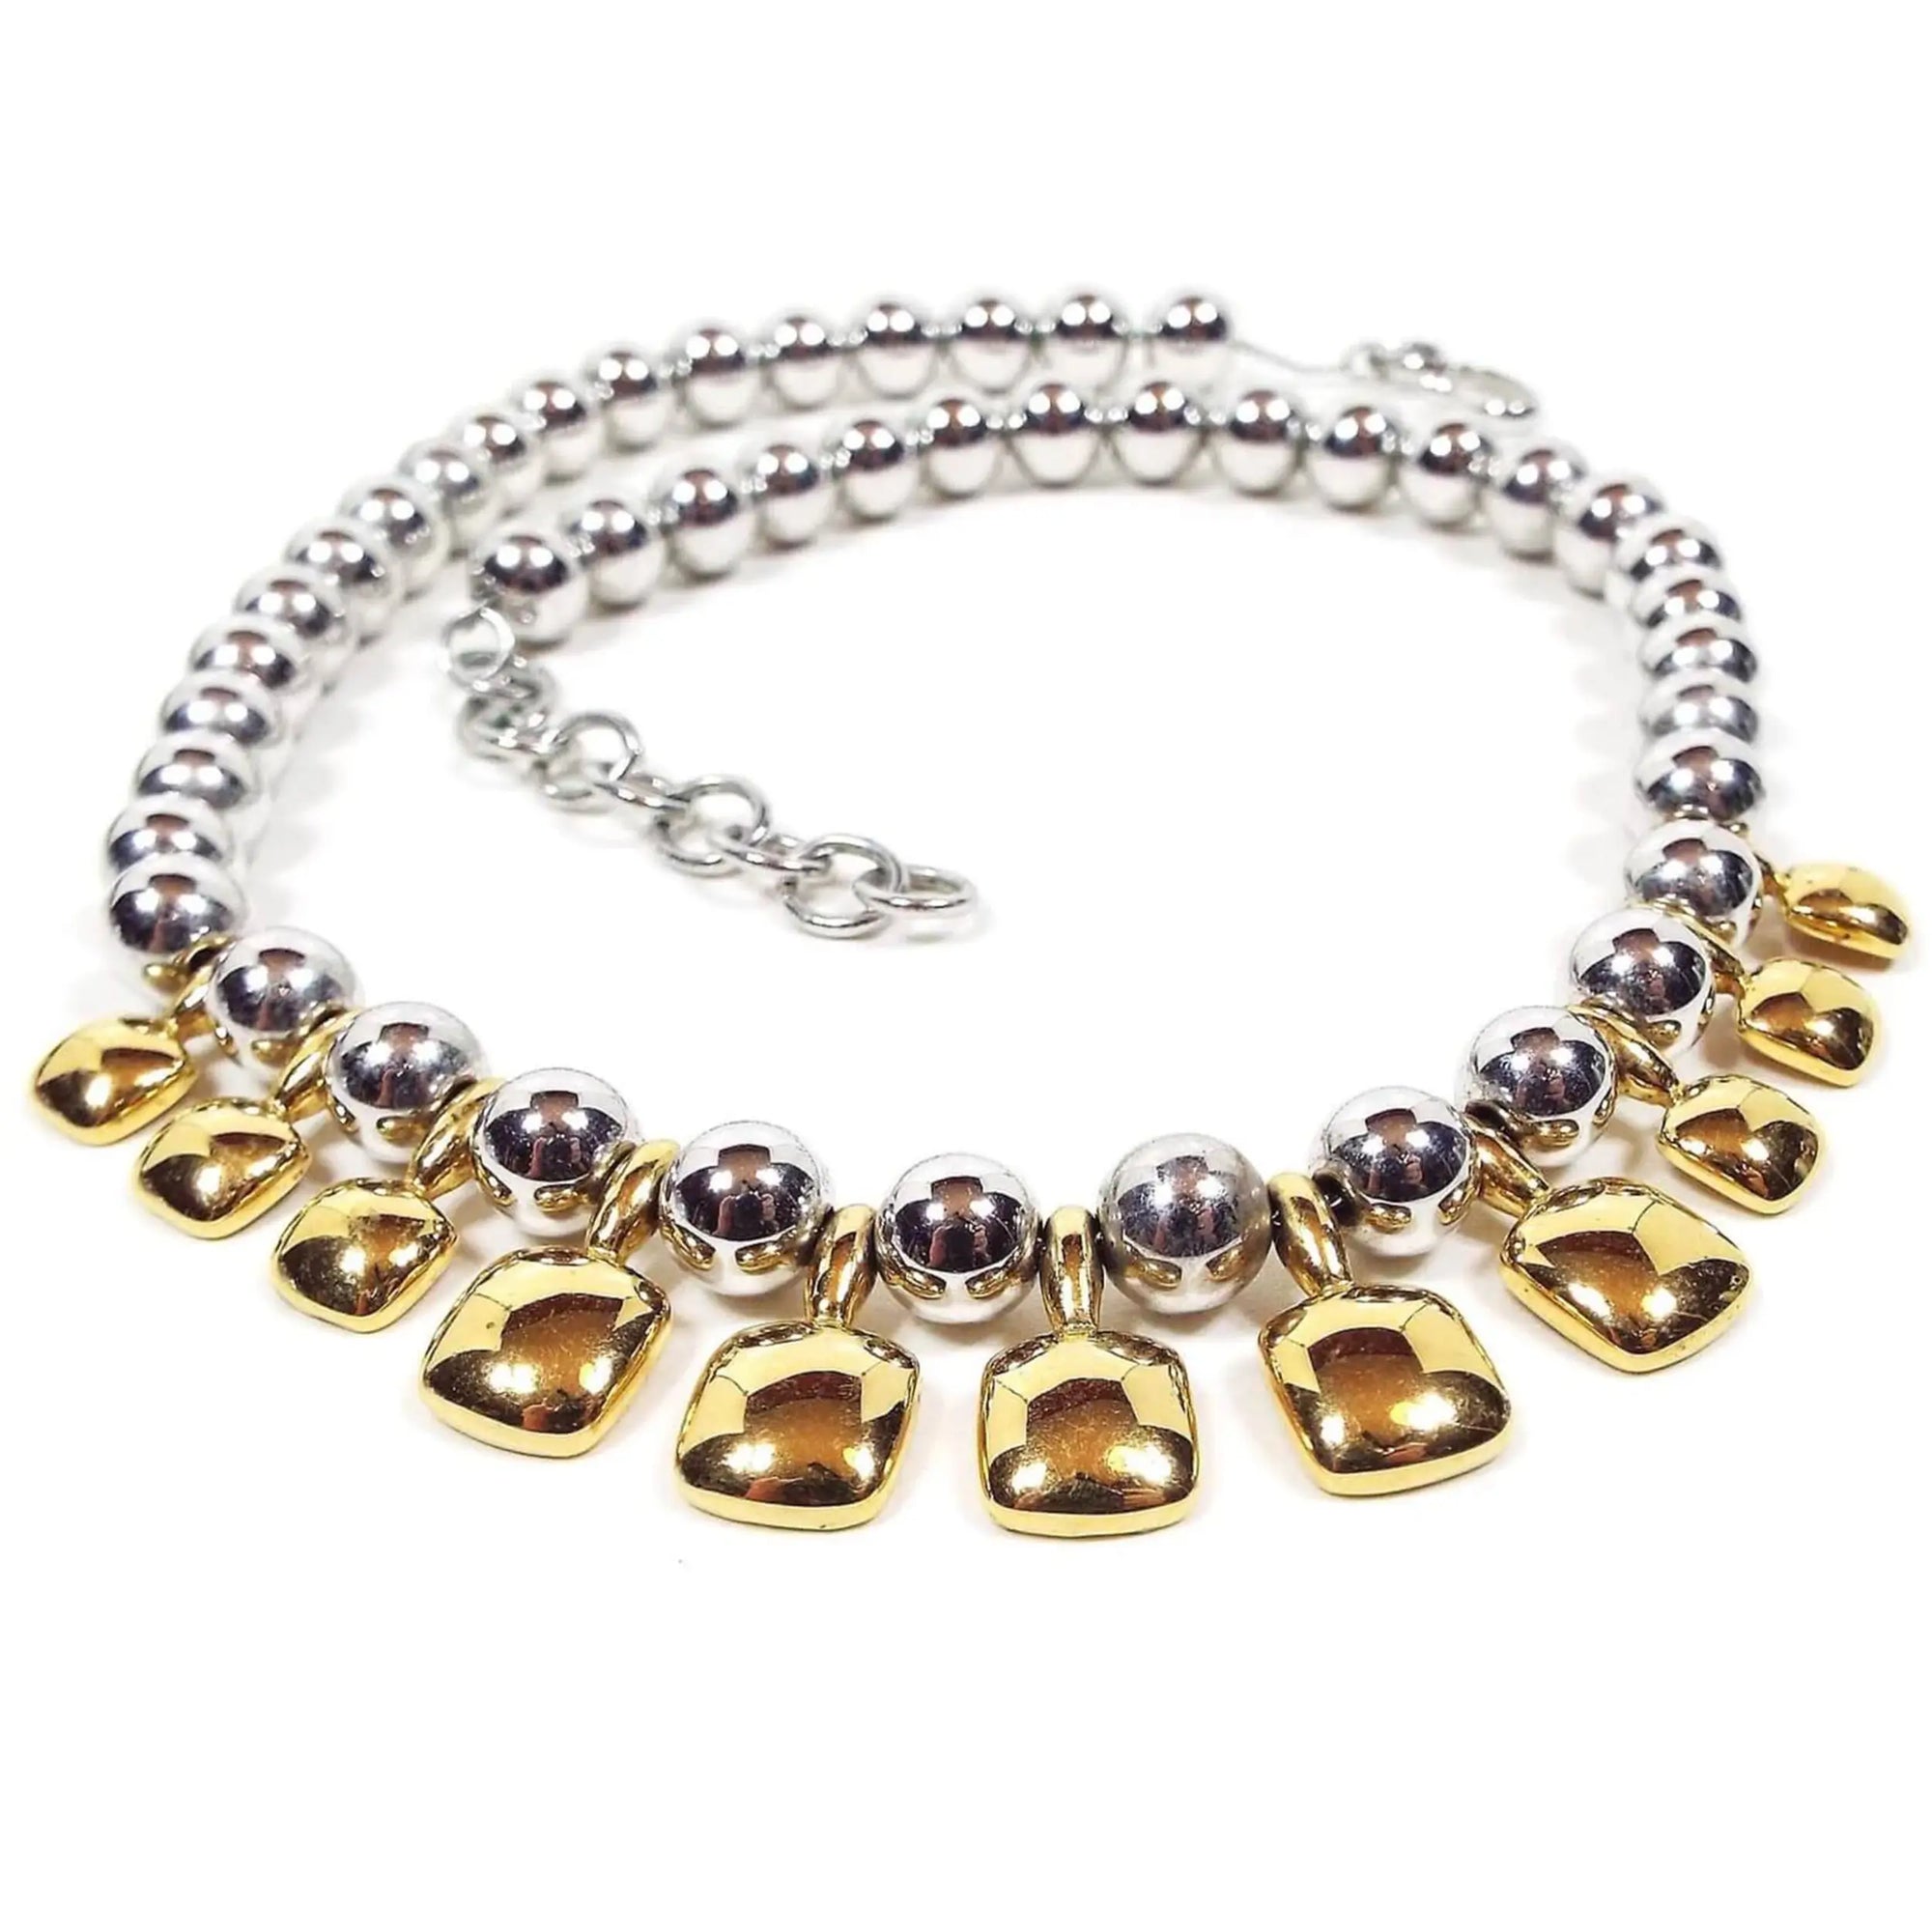 Front view of the two tone retro vintage Monet metal beaded necklace. There are round silver tone color metal beads all the way down the necklace strung on a thin chain. The bottom part has gold tone color rounded square drops hanging down.